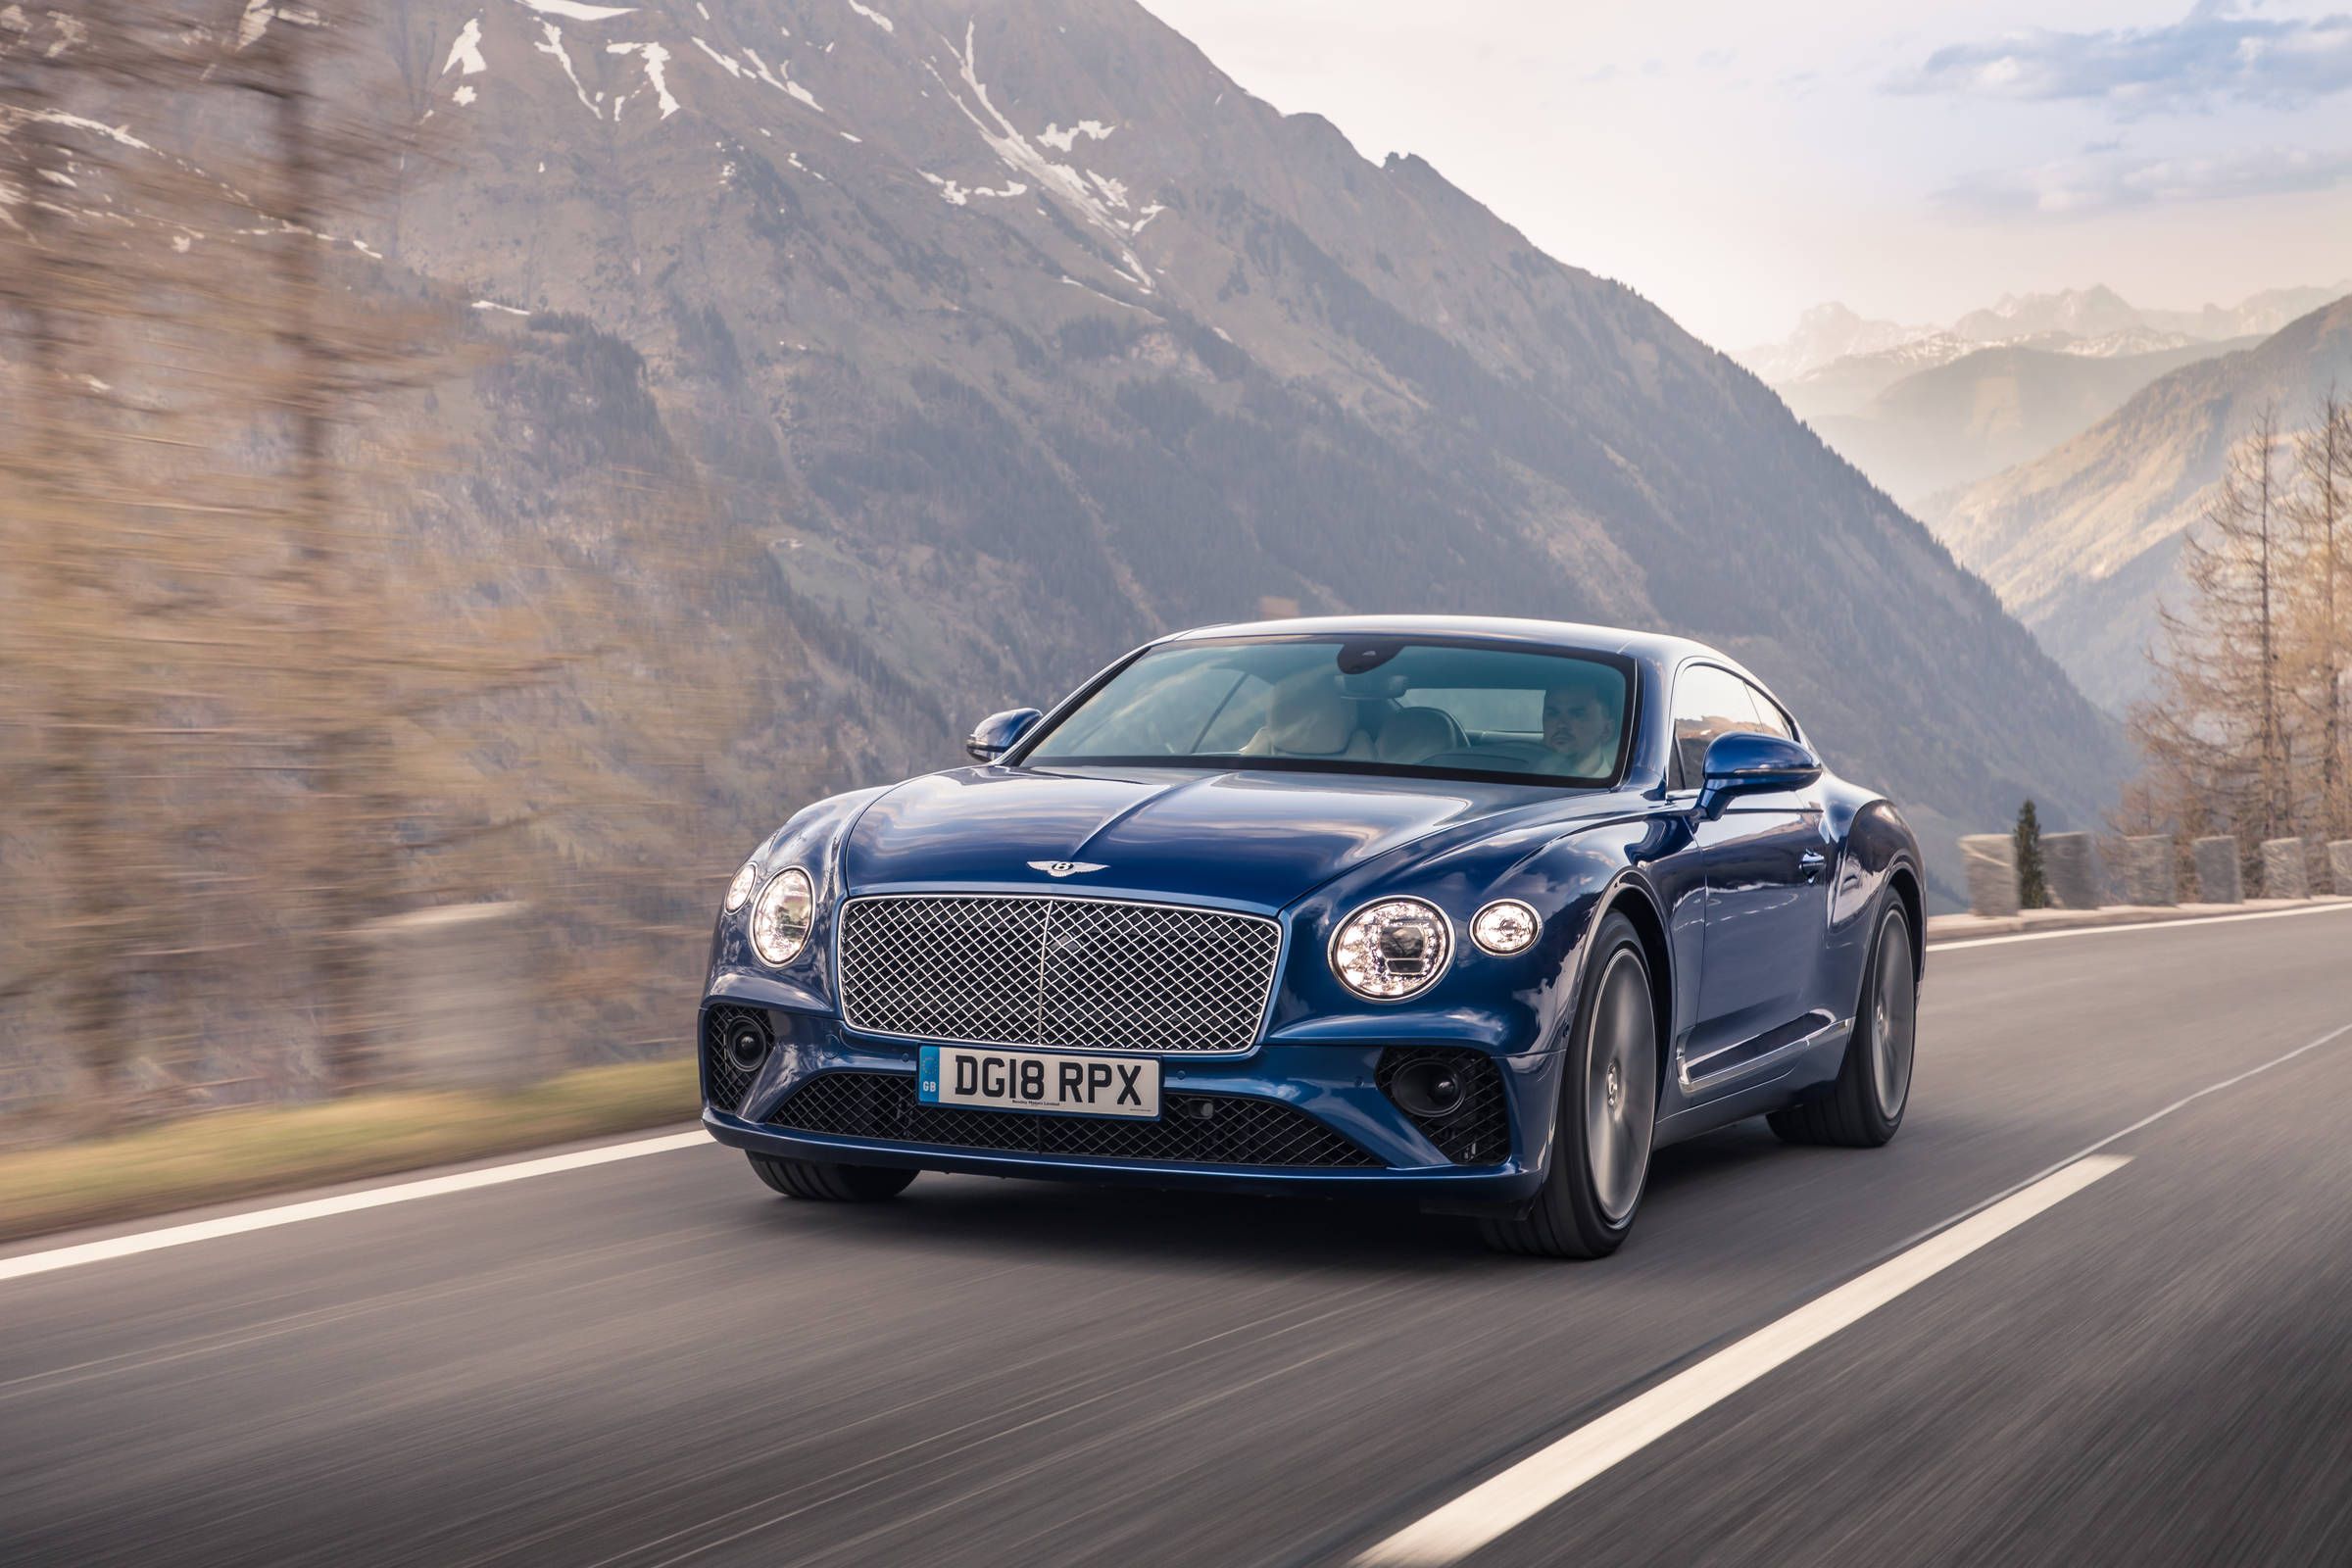 2019 Bentley Continental GT first drive review: Why fly when you